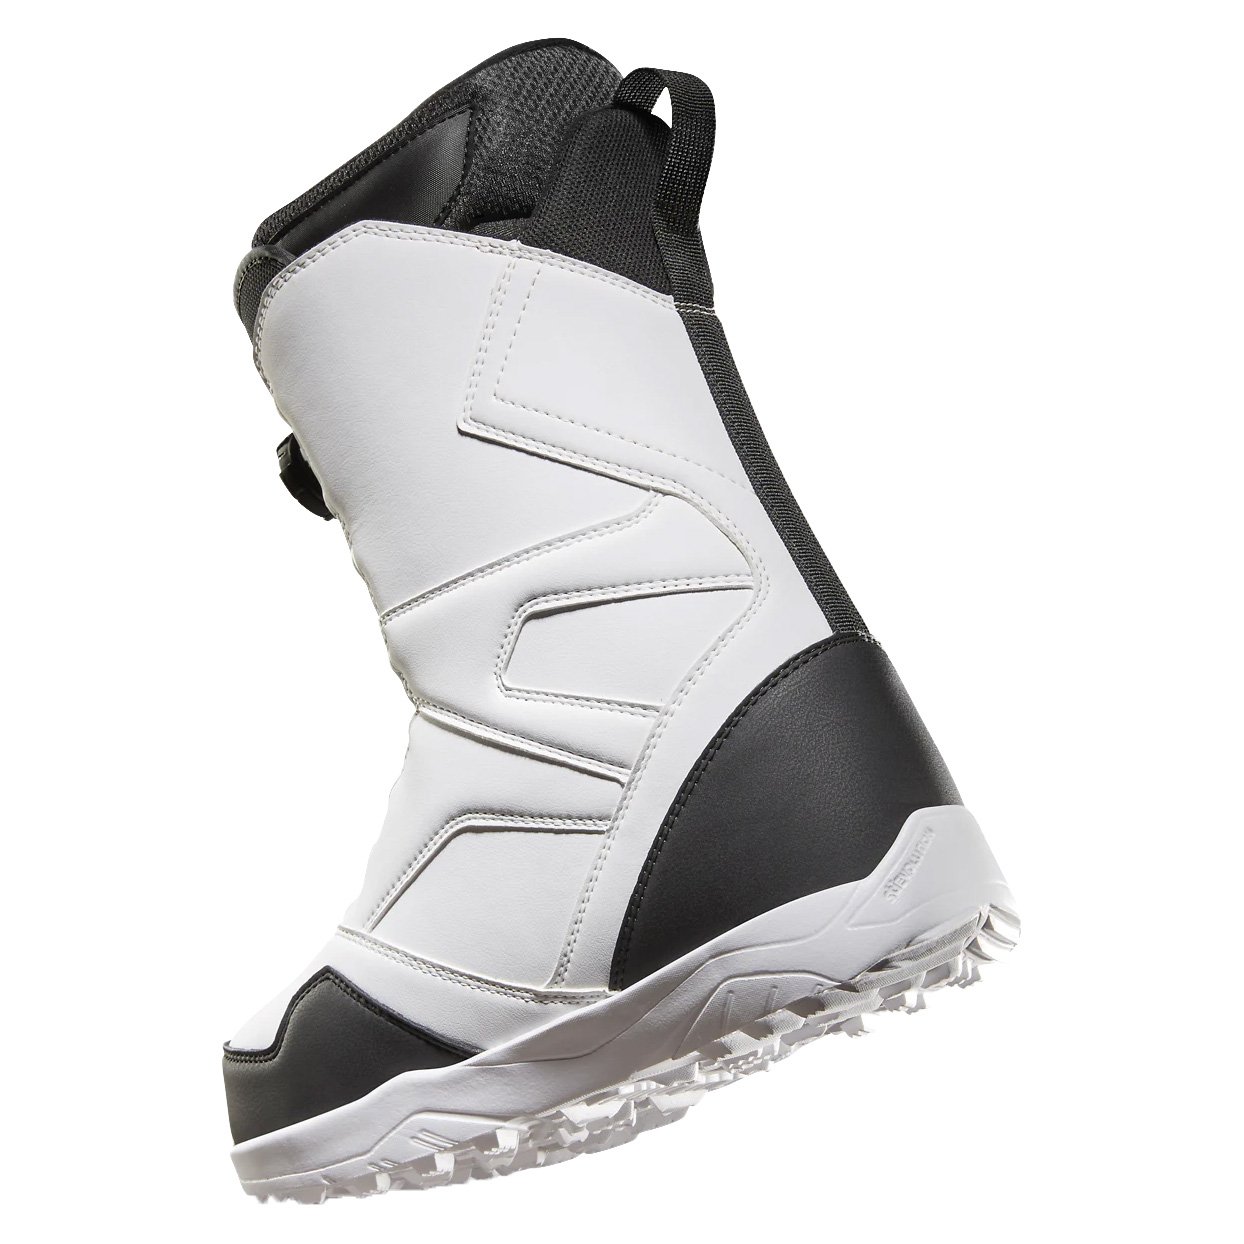 thirtytwo STW Double Boa Men's Snowboard Boots